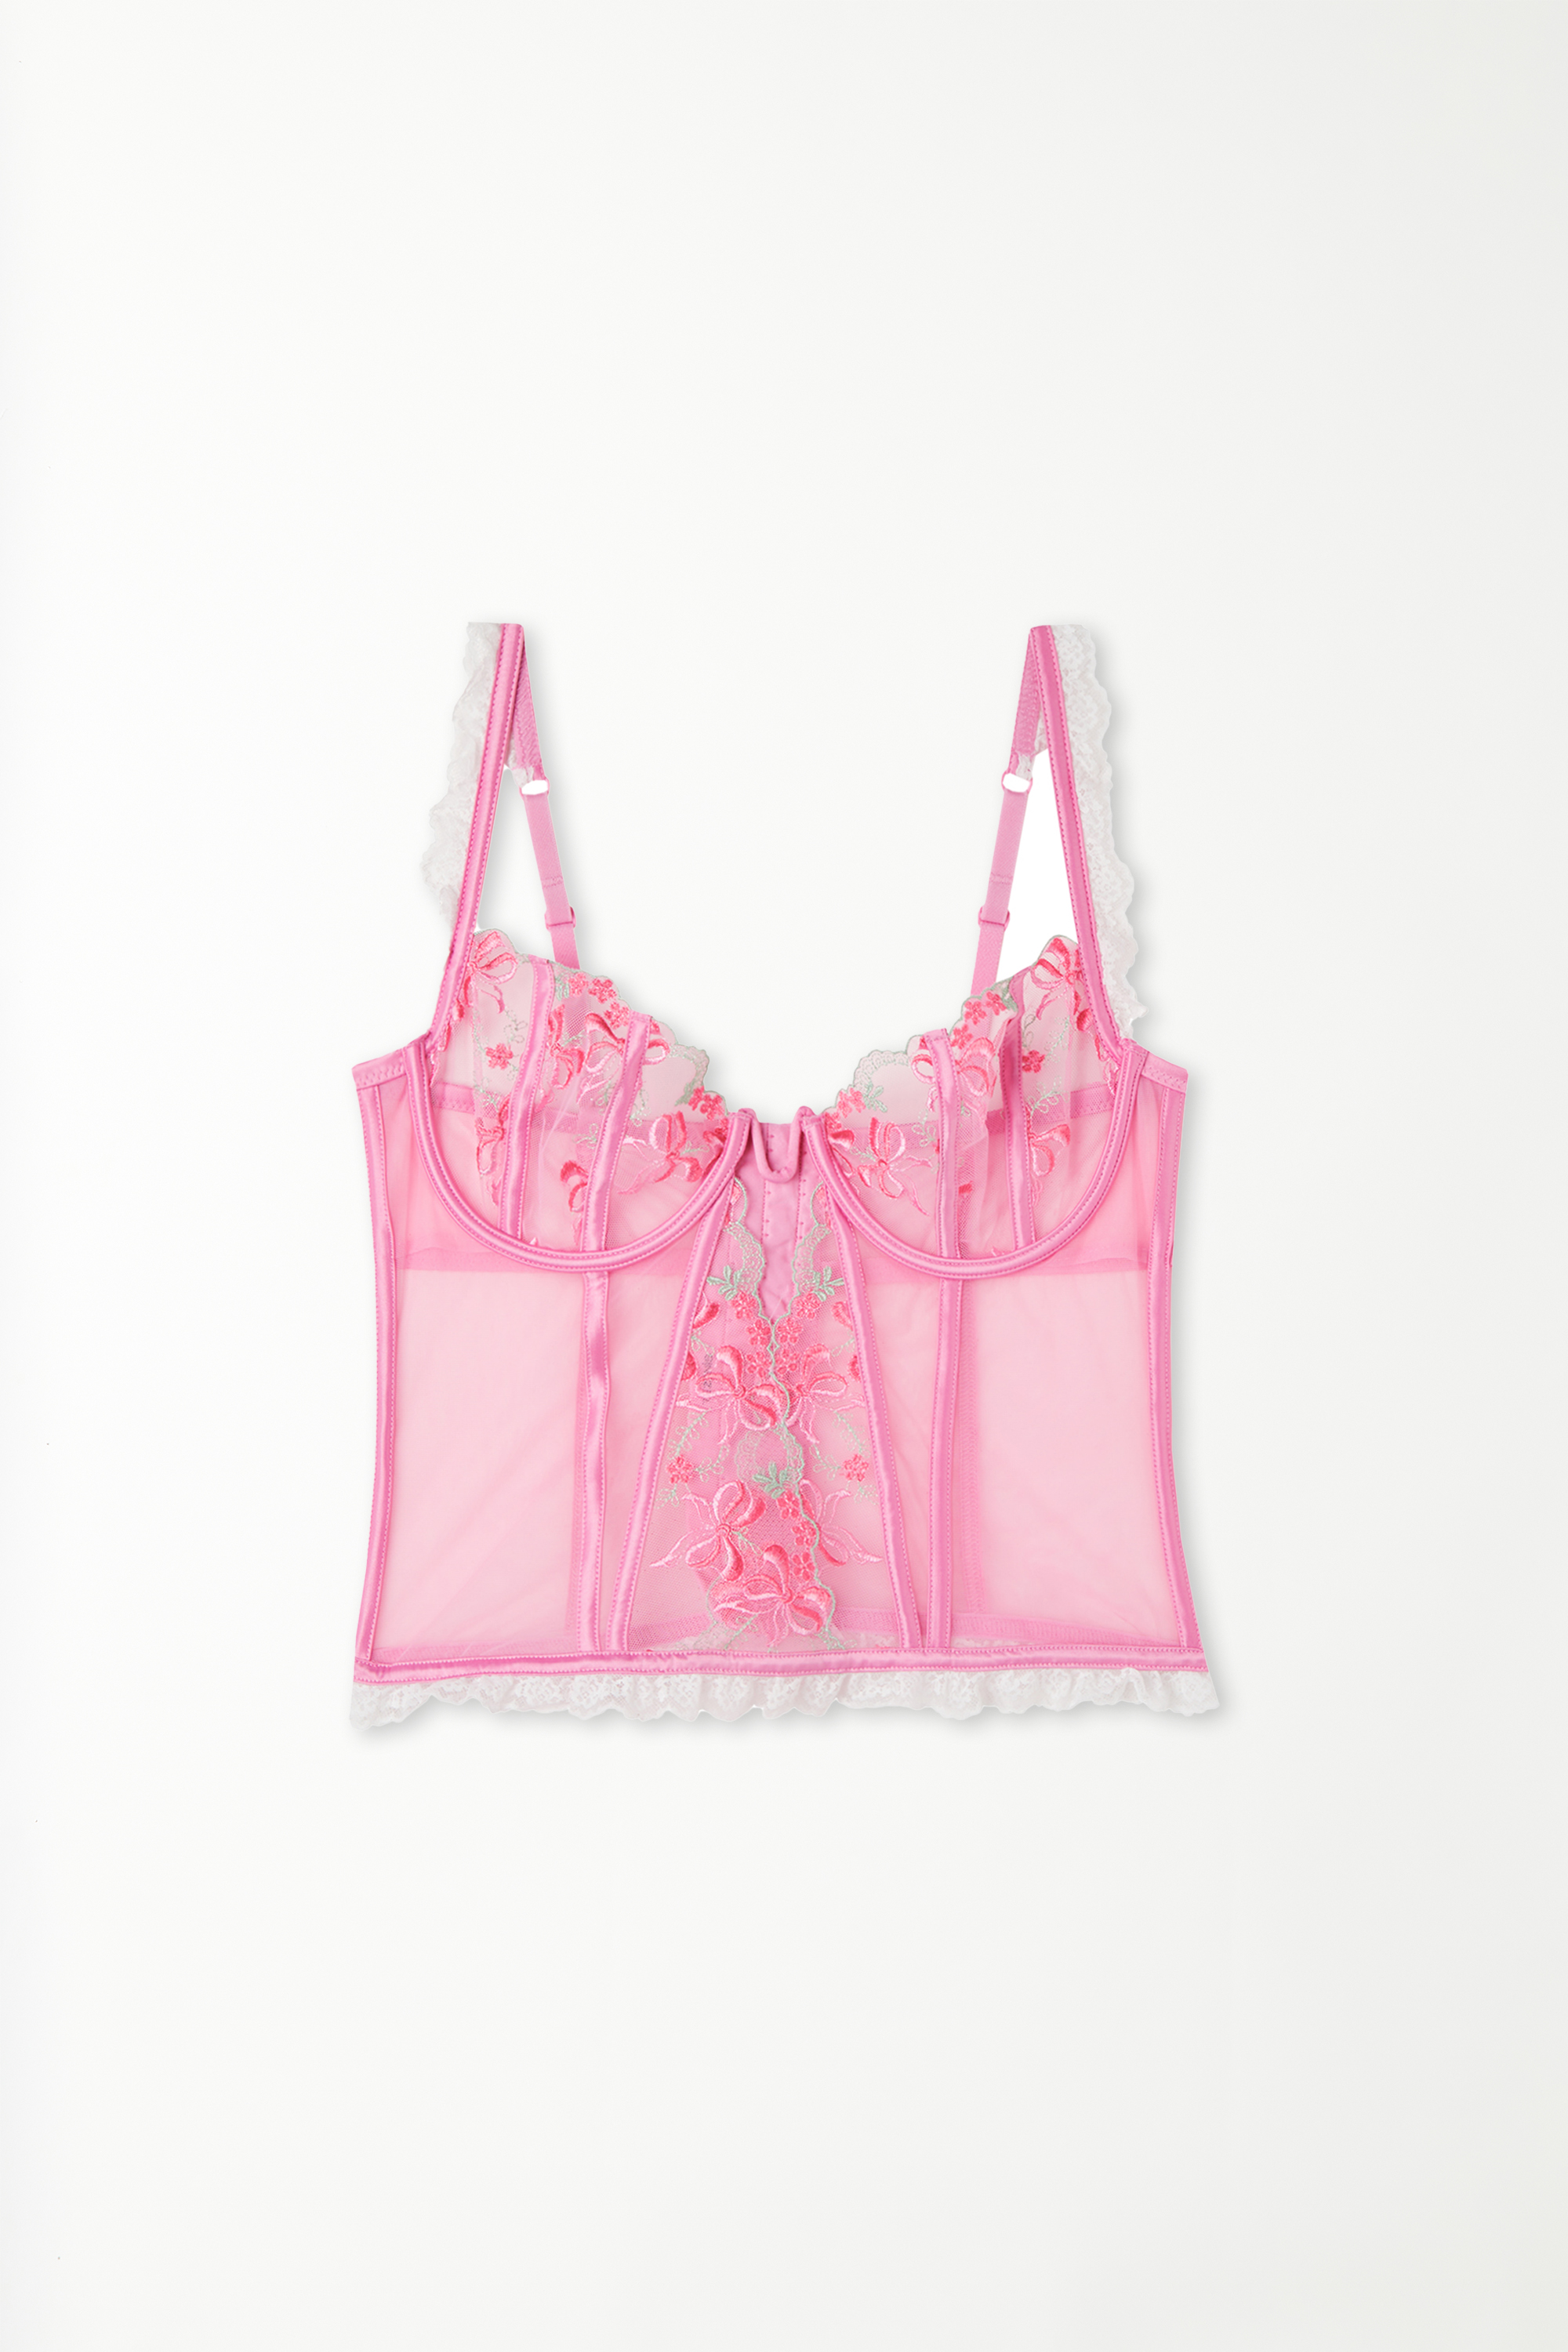 Corpetto Bra Top Balconcino Pink Candy Lace